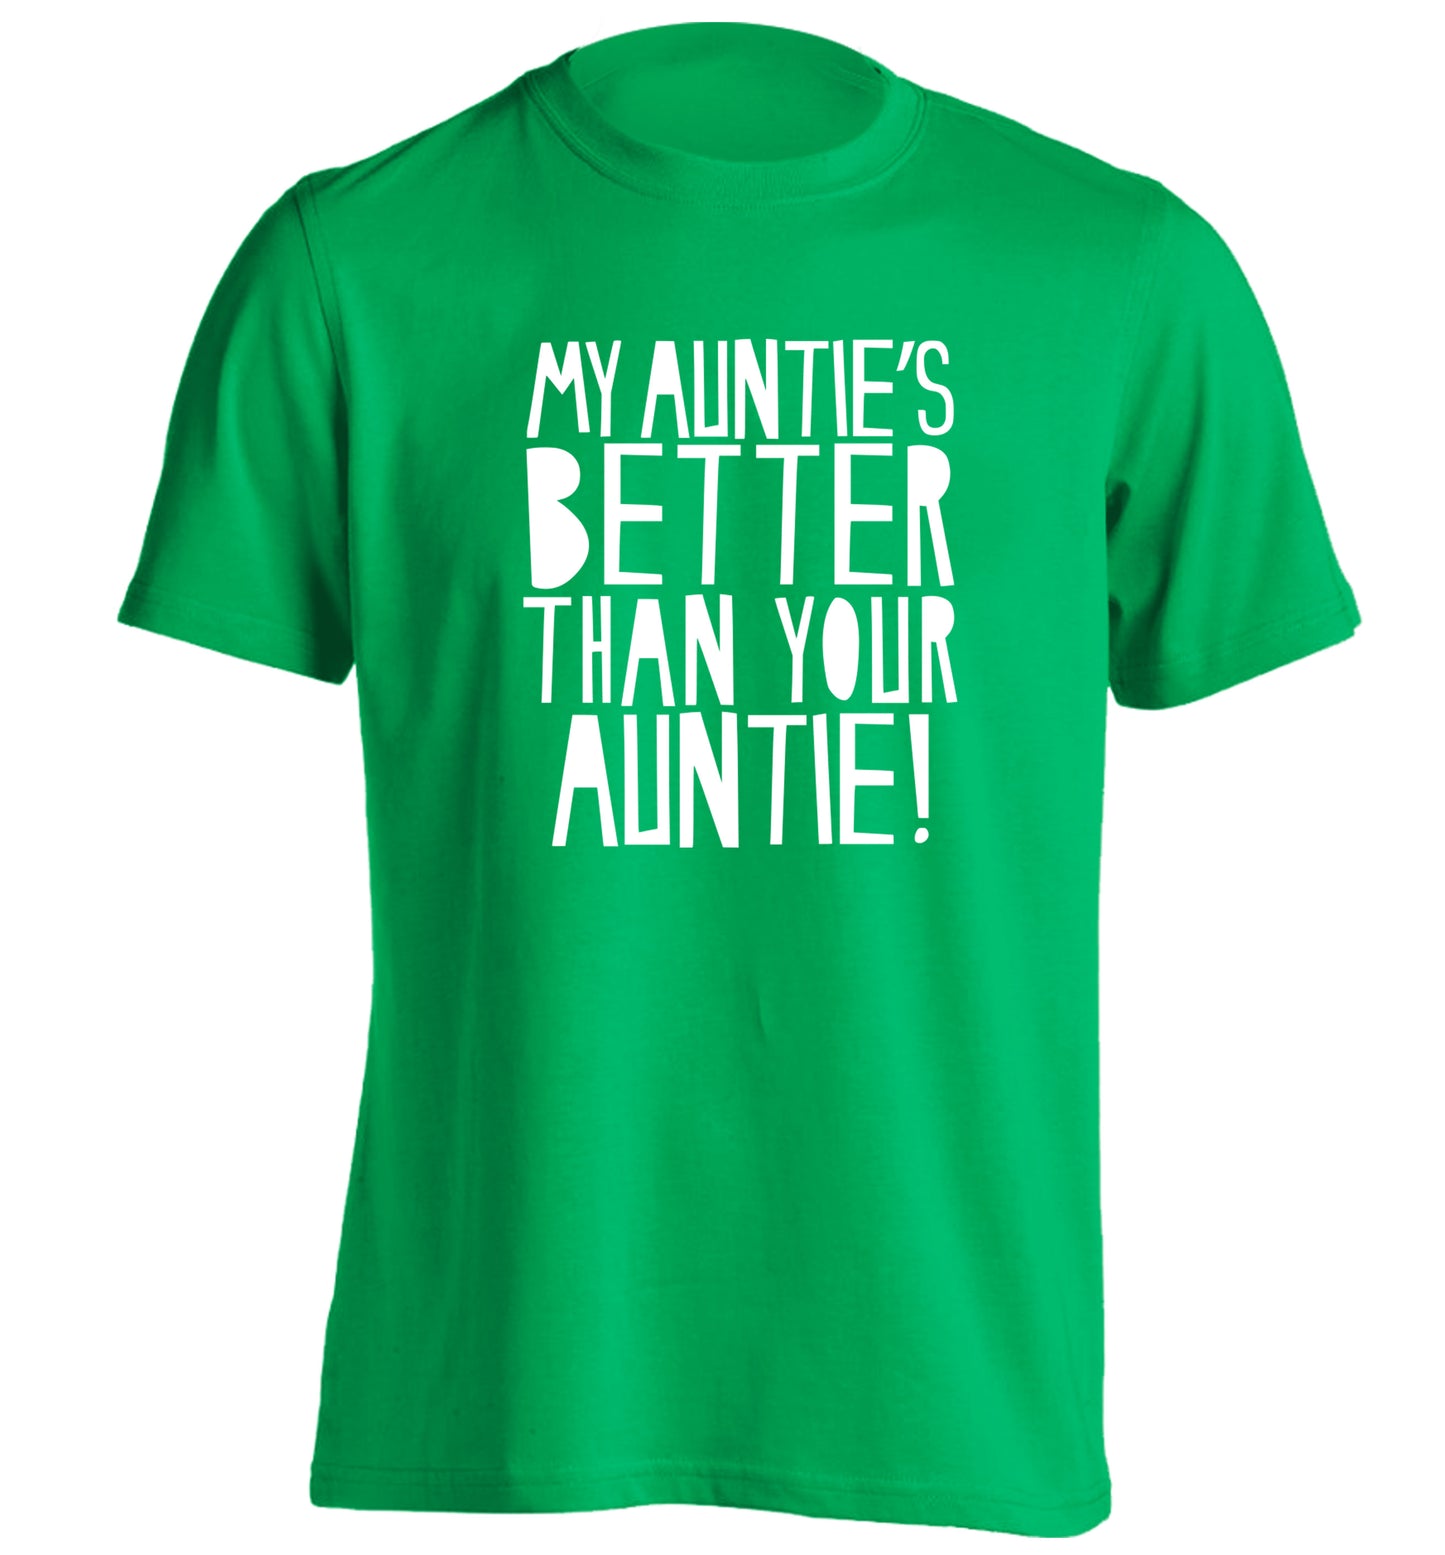 My auntie's better than your auntie adults unisex green Tshirt 2XL